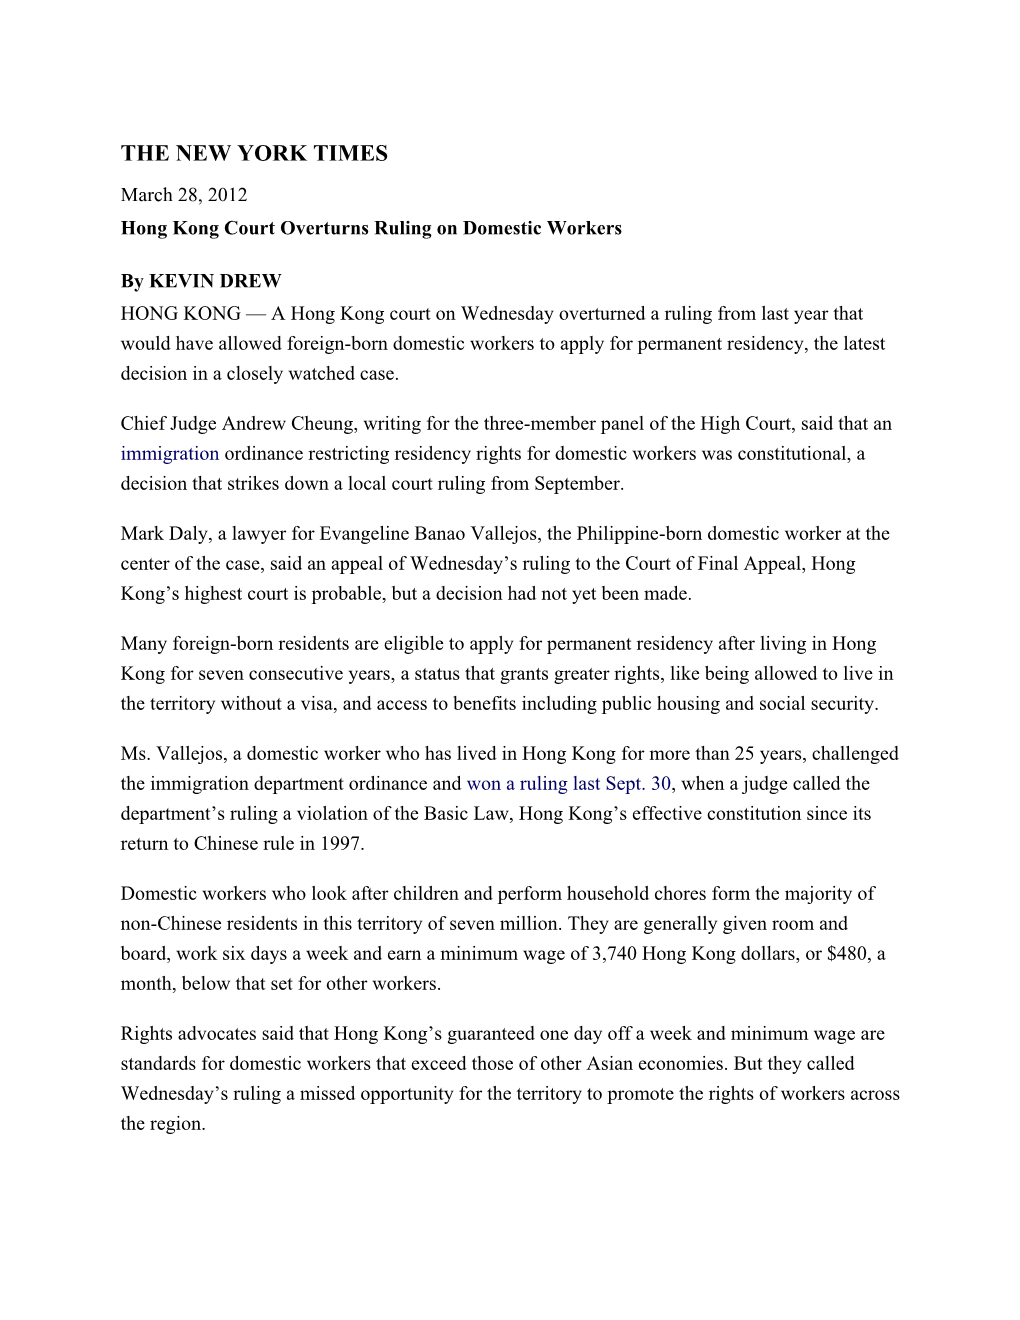 THE NEW YORK TIMES March 28, 2012 Hong Kong Court Overturns Ruling on Domestic Workers